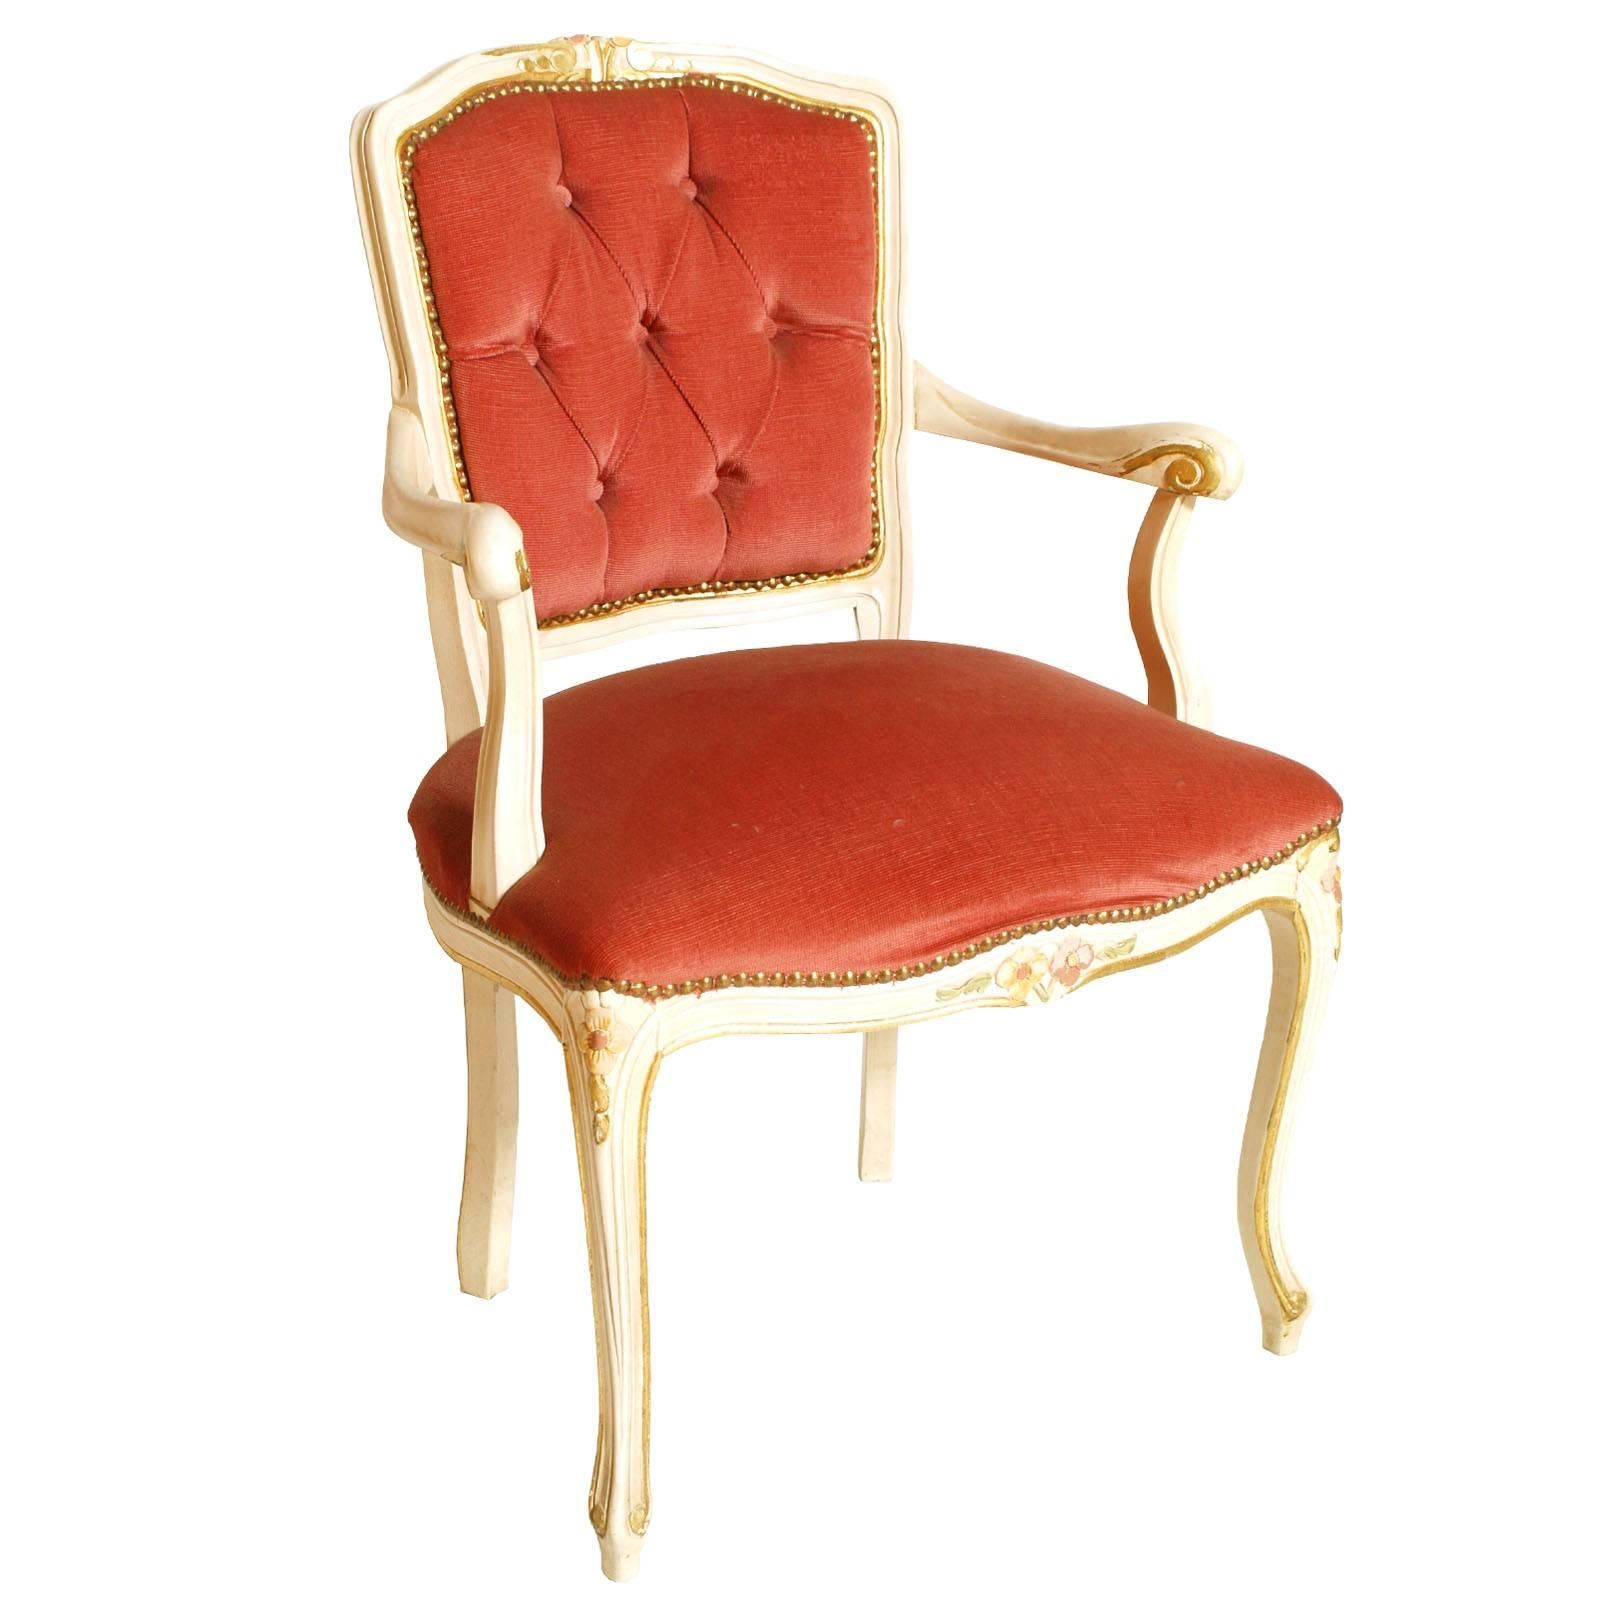 They can be sold separately
Pair of Venetian Baroque chairs Louis XV decorated armchairs
Hand-decorated with natural and white lacquered colors, padding on the tufted backrest, covered with coral red velvet in excellent conditions; artisan